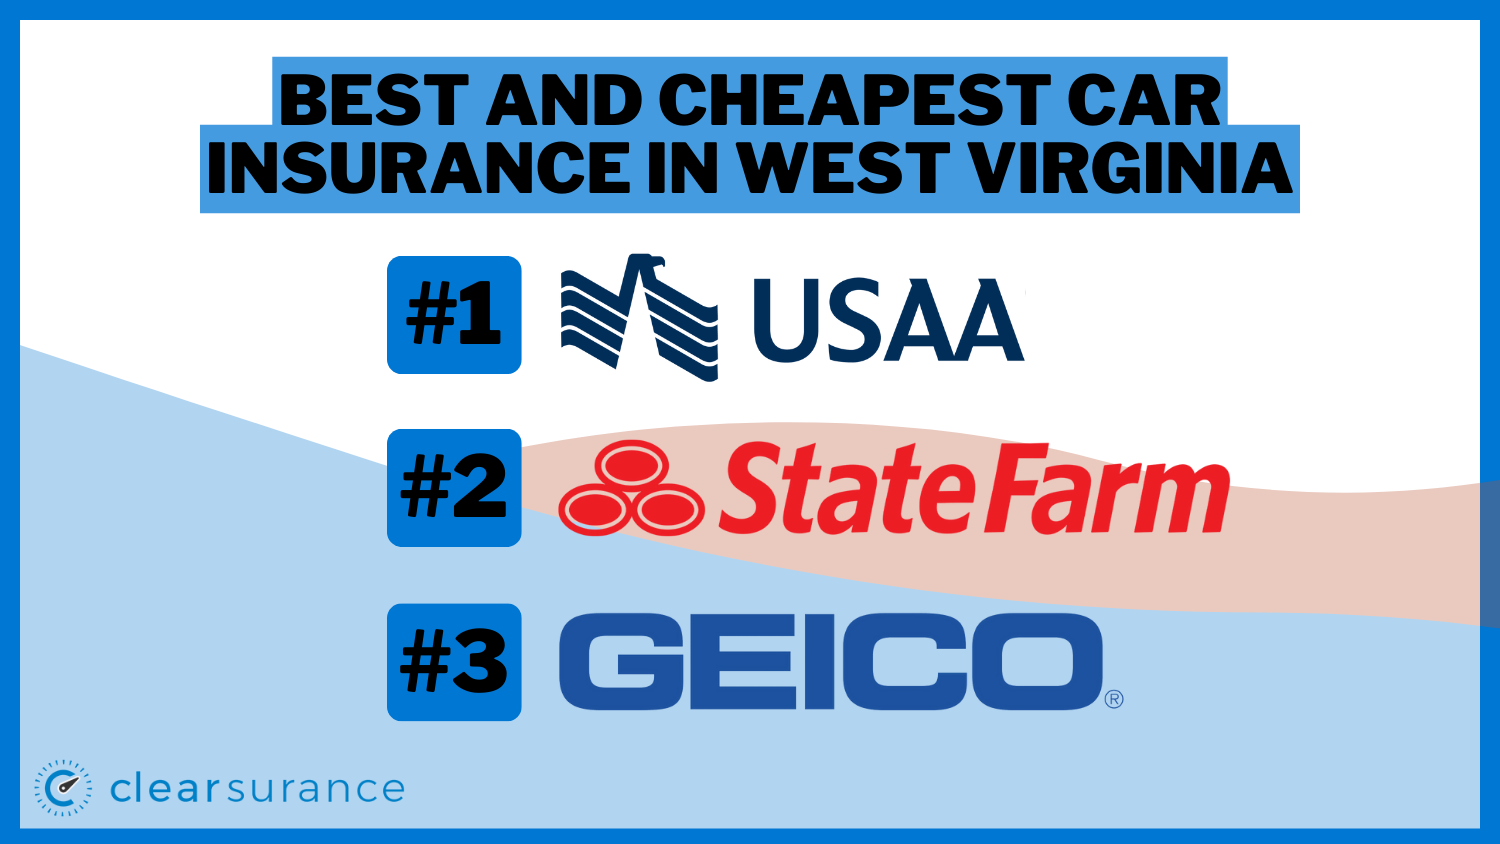 Best and Cheapest Car Insurance in West Virginia